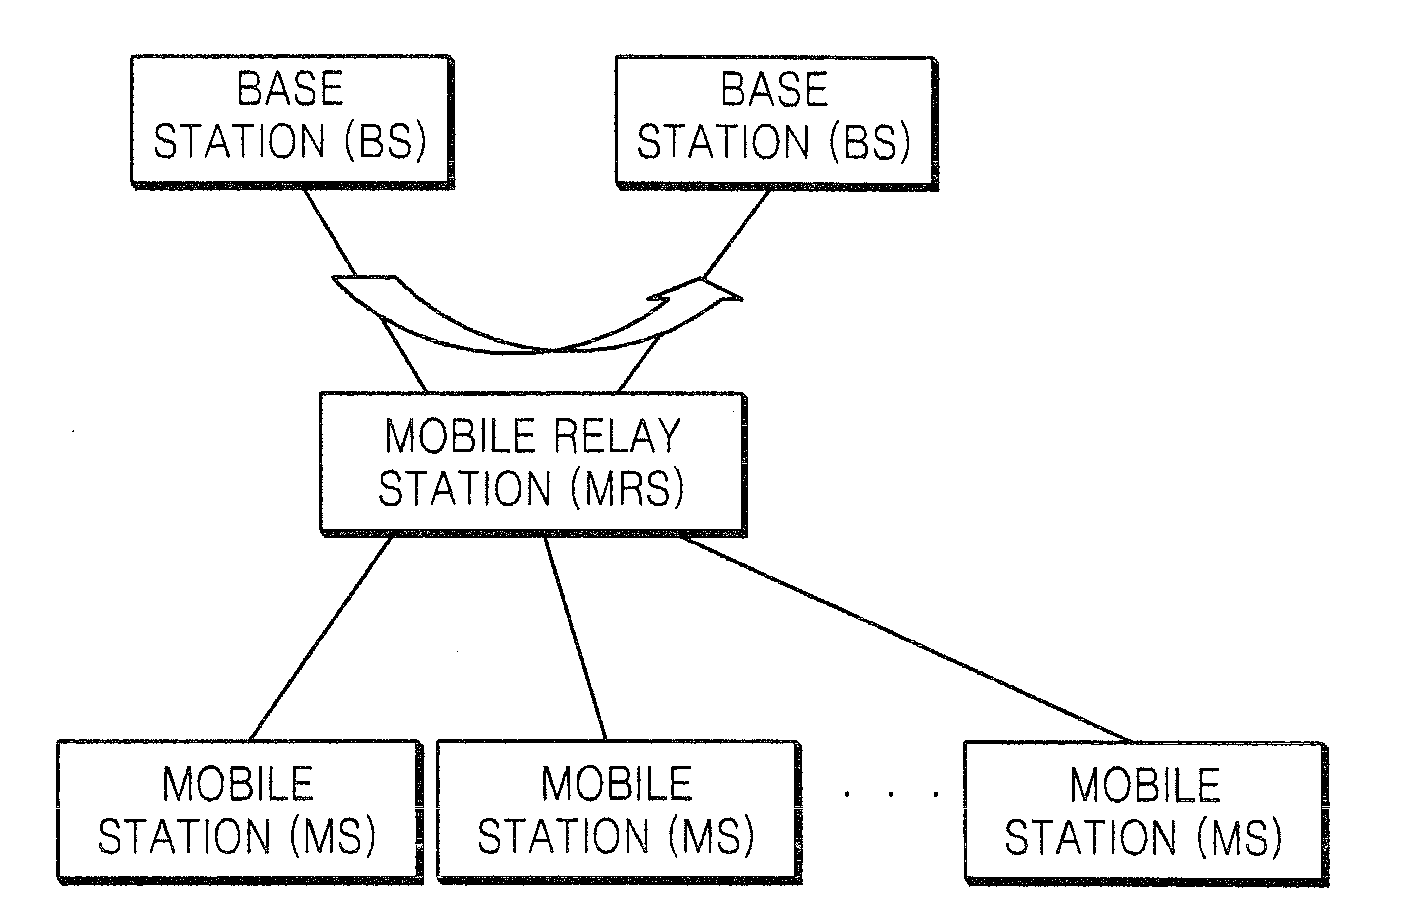 Handover method with mobile relay station